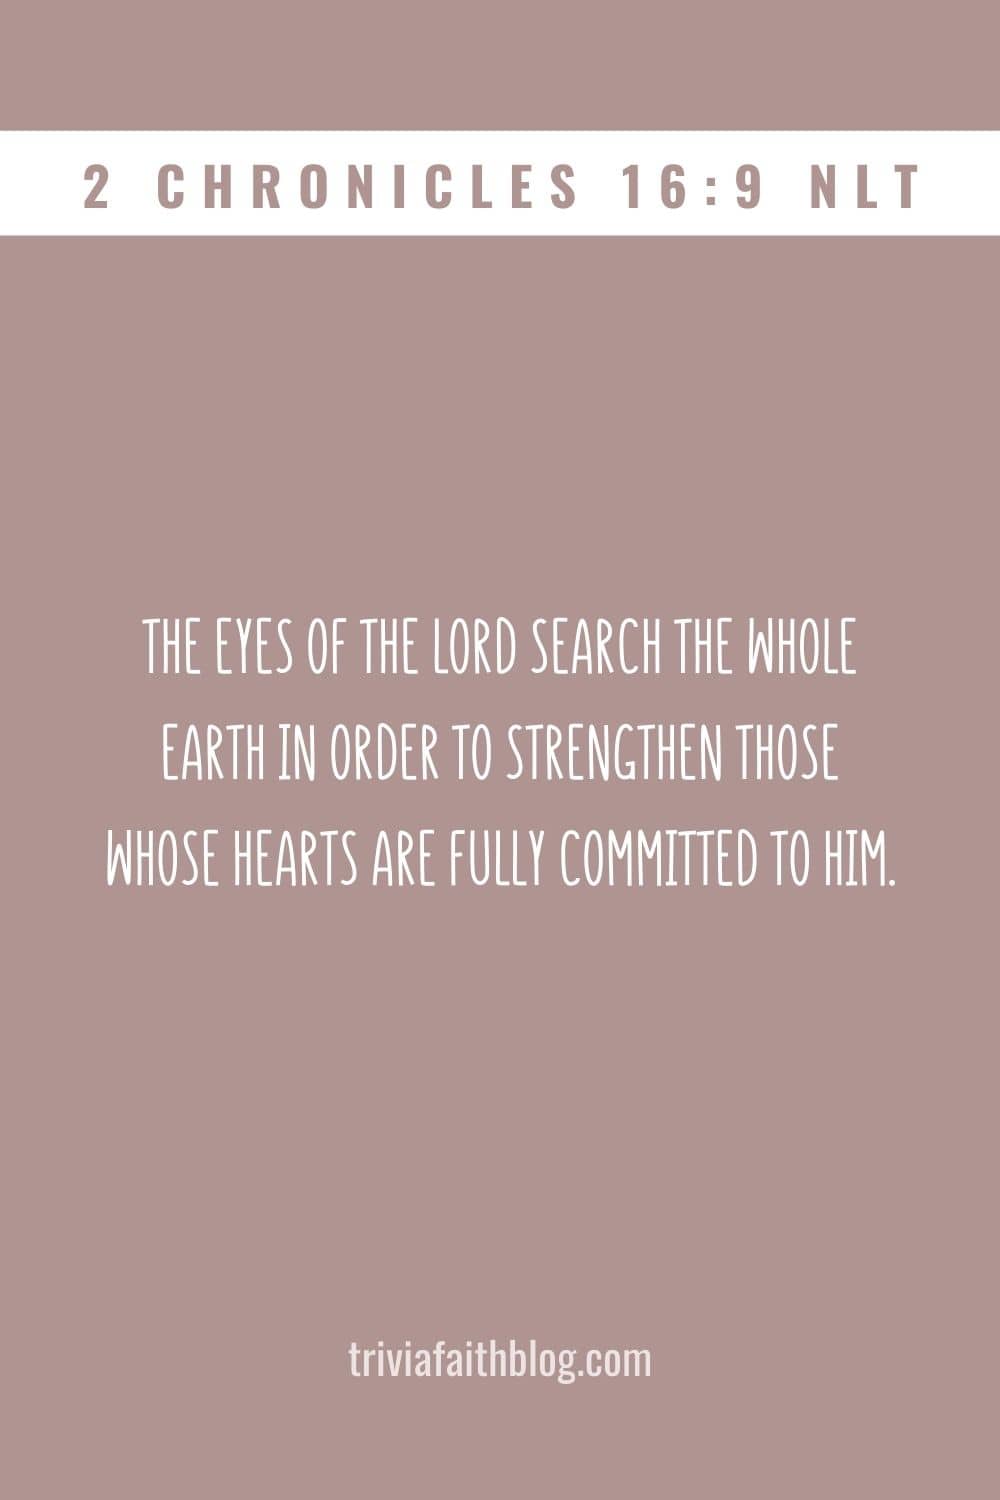 The eyes of the LORD search the whole earth in order to strengthen those whose hearts are fully committed to him